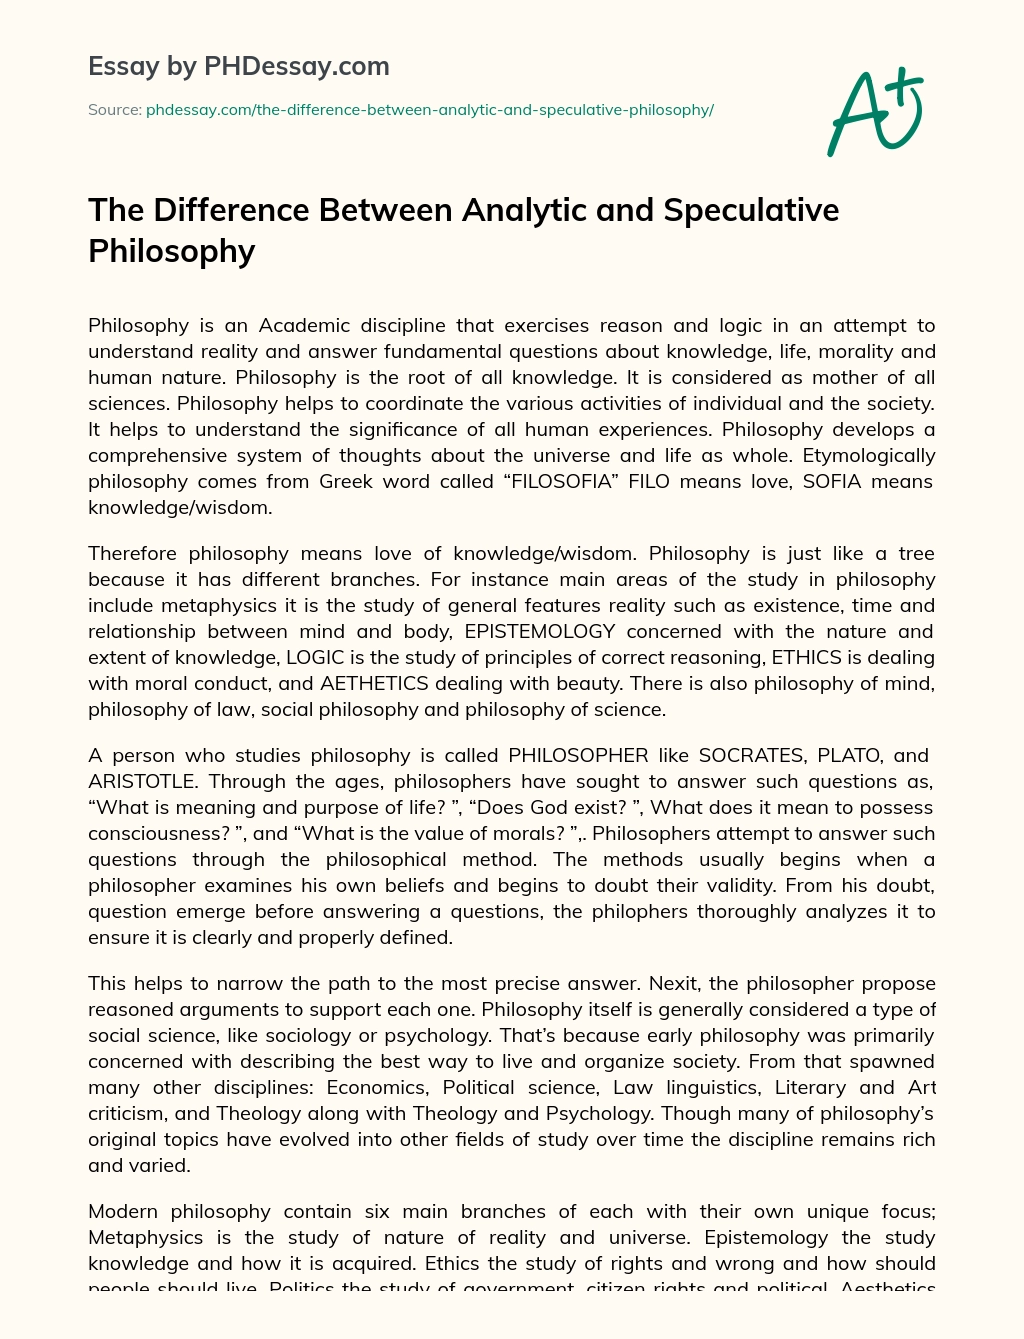 The Difference Between Analytic and Speculative Philosophy essay